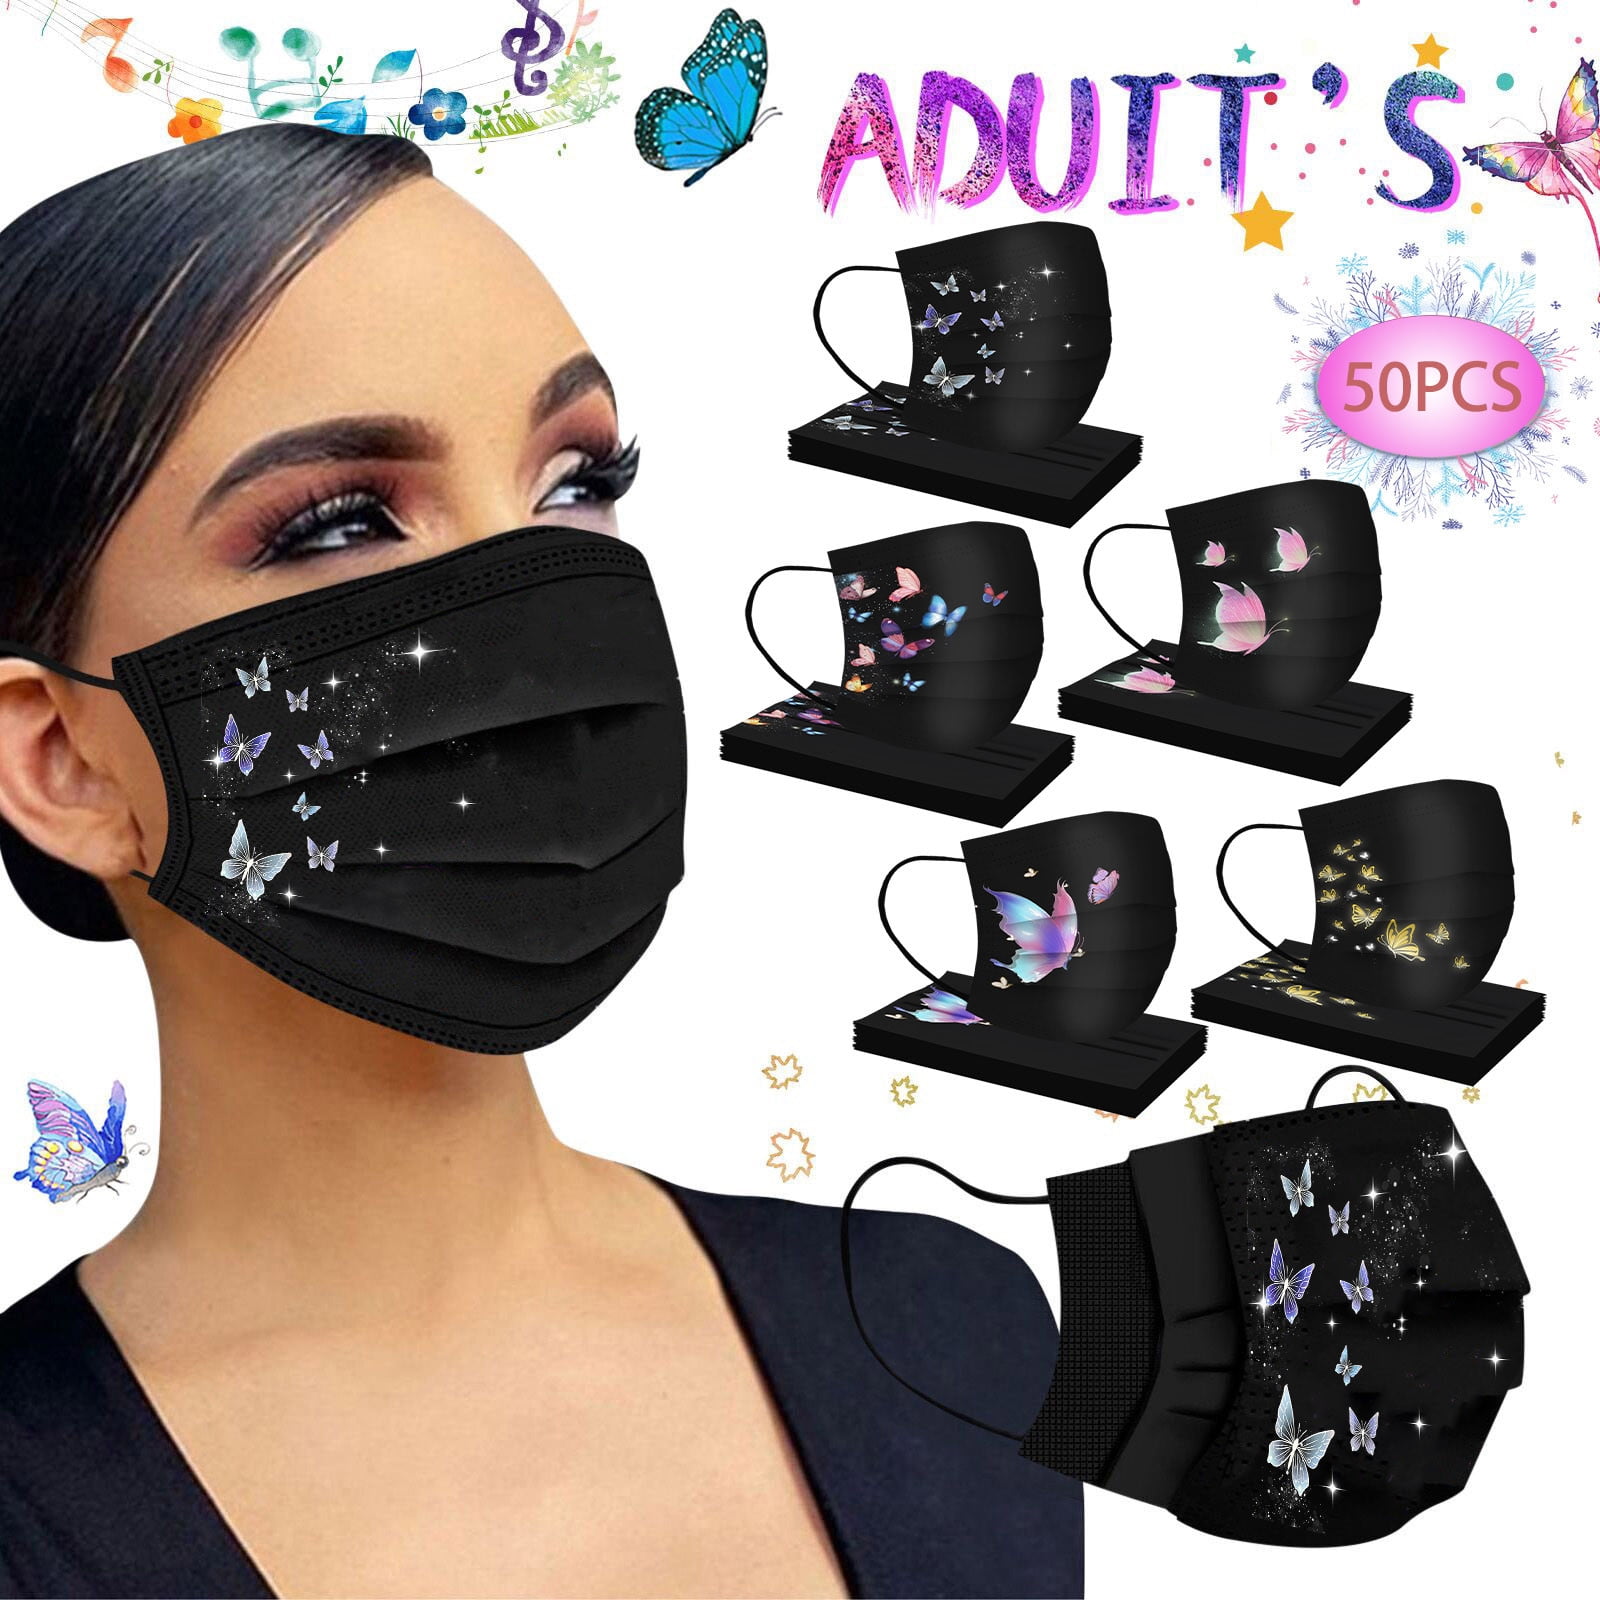 ZKV 50ct Adult Face Mask Butterfly, Breathable 3-Layer Disposable Masks with Designs,3 Ply Black Masks Full Face Protection for Women Men, Adult